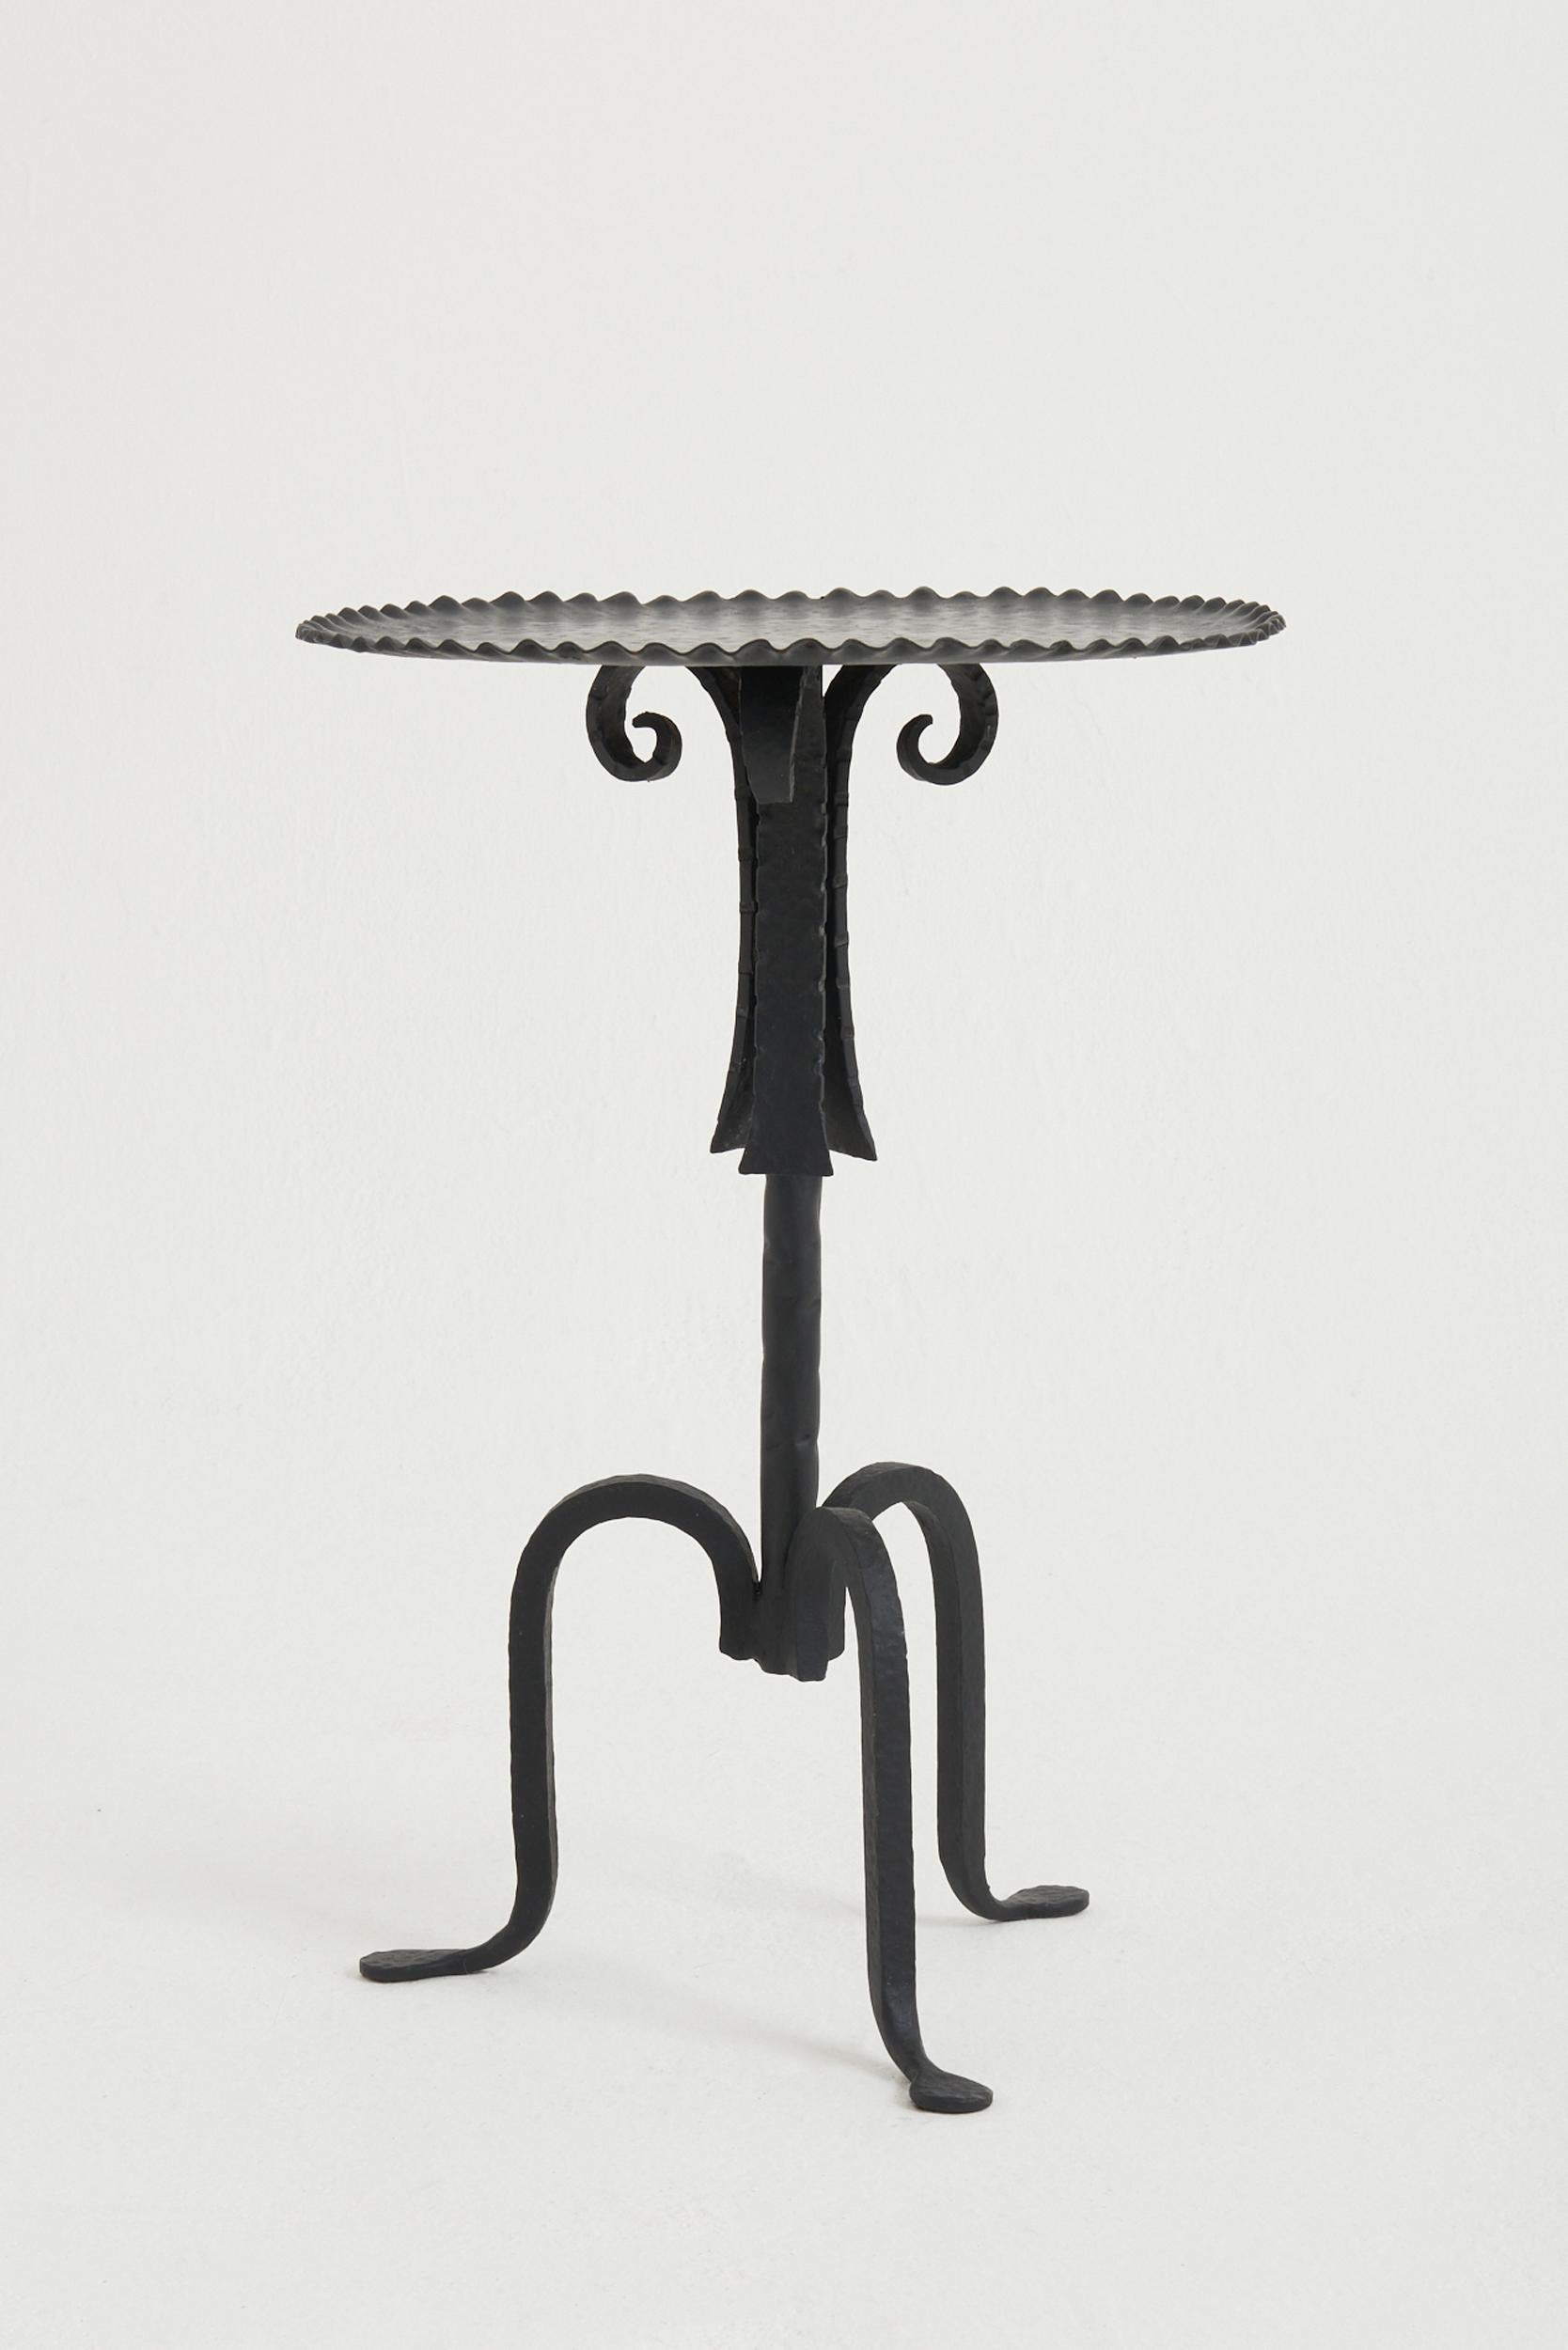 A black patinated wrought iron martini table.
Spain, third quarter of the 20th century.
Measures : 60 cm high by 42 cm diameter.